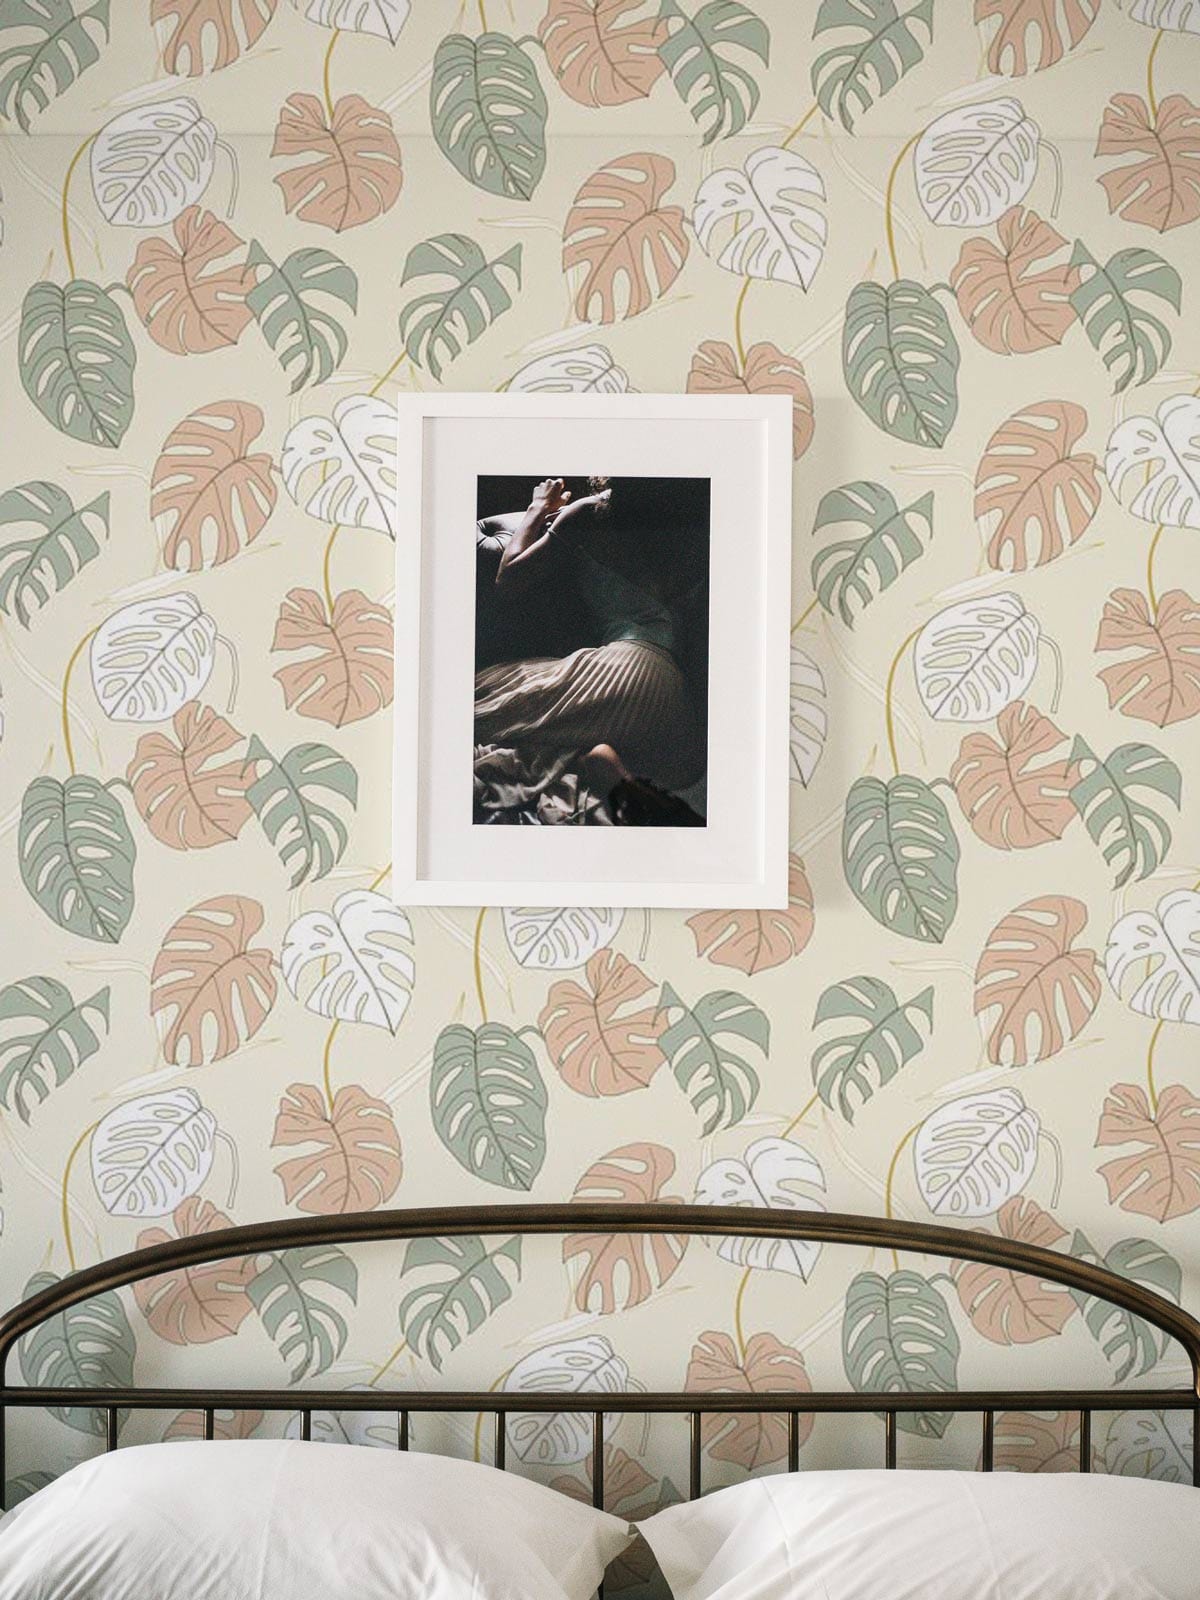 Decorating a bedroom with a Palm Leaves wallpaper mural spliced together